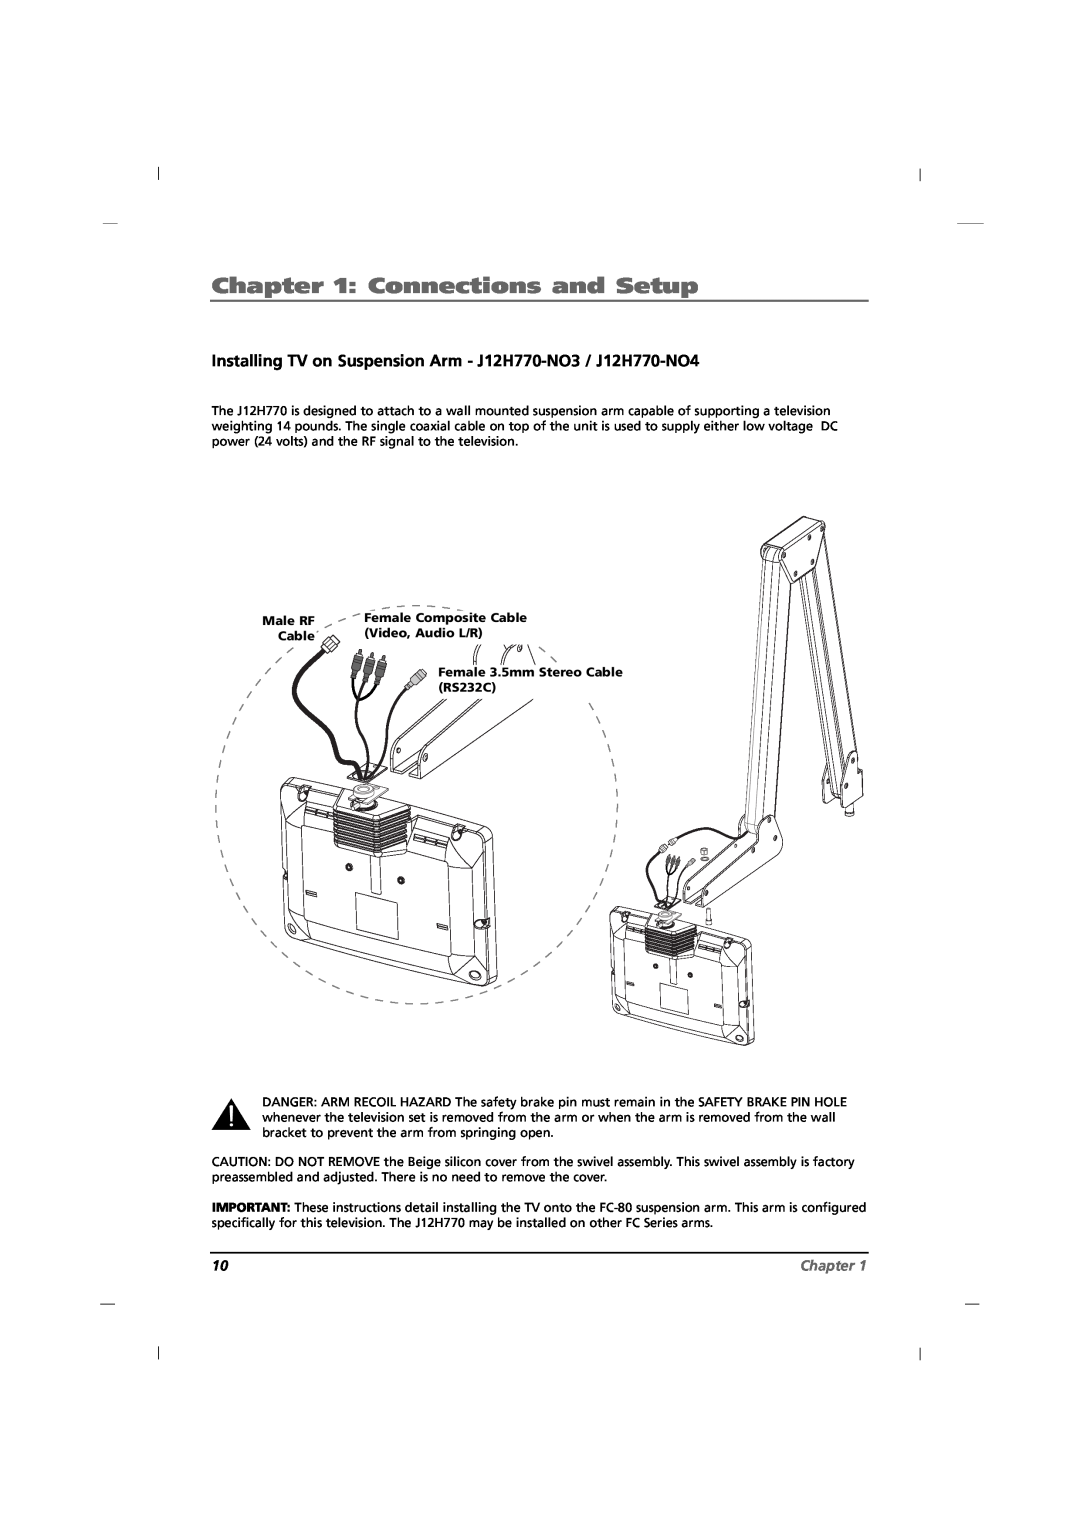 RCA manual Installing TV on Suspension Arm - J12H770-NO3 / J12H770-NO4, Connections and Setup, Chapter, Male RF, Cable 